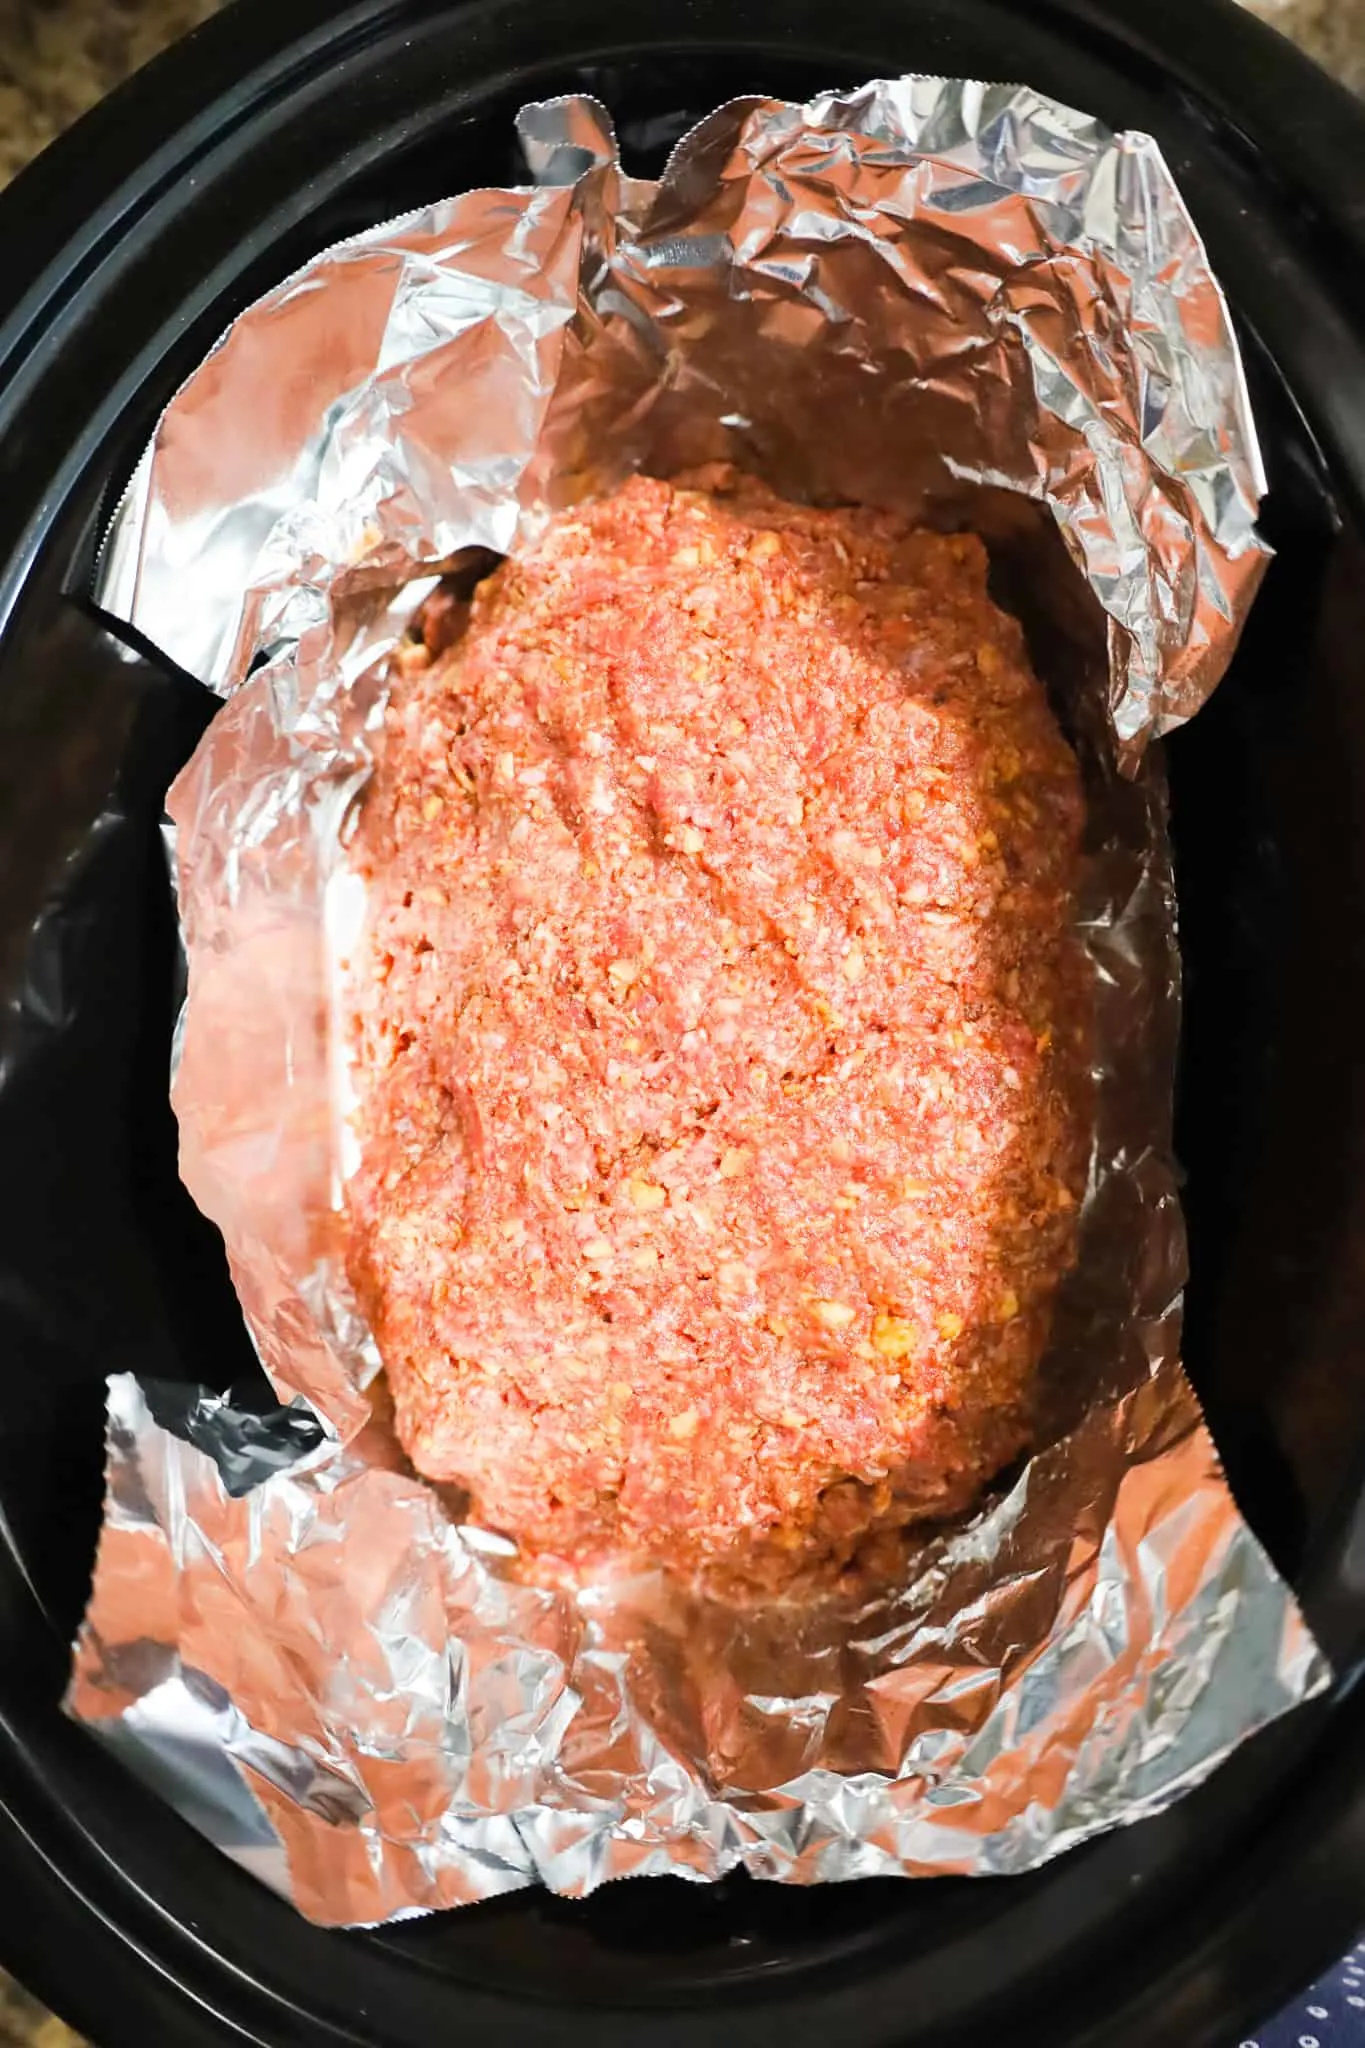 raw meatloaf mixture in a foil lined crock pot